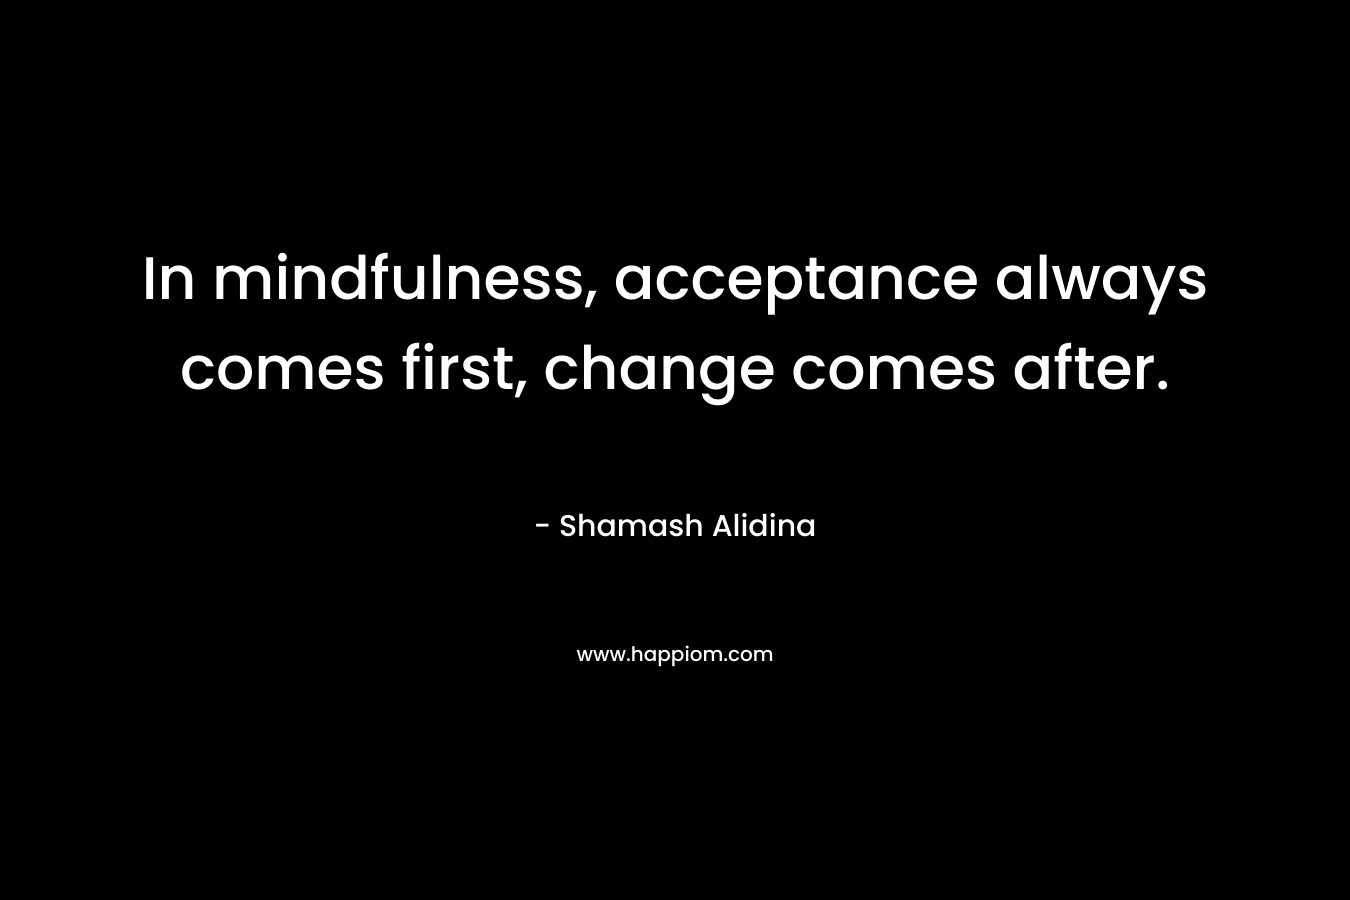 In mindfulness, acceptance always comes first, change comes after. – Shamash Alidina